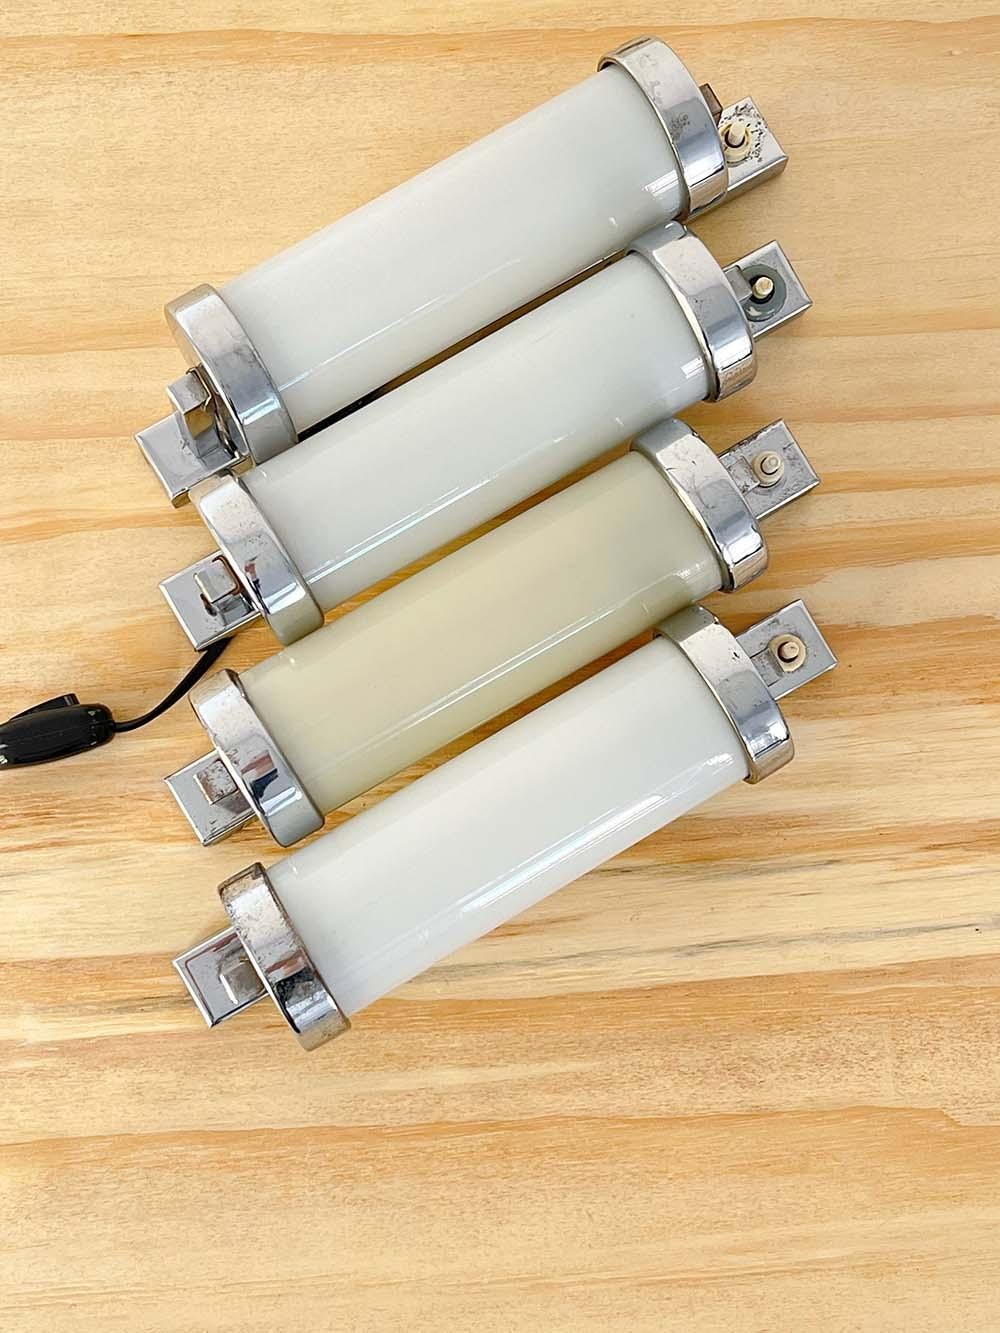 Set of 4 Bauhaus chrome-plated steel tubular wall lamps made by Napako in Czechoslovakia, 1940s.

Each of these beautiful lamps made by the famous Czech manufacturer Napako features a chrome-plated steel structure and their instantly recognizable